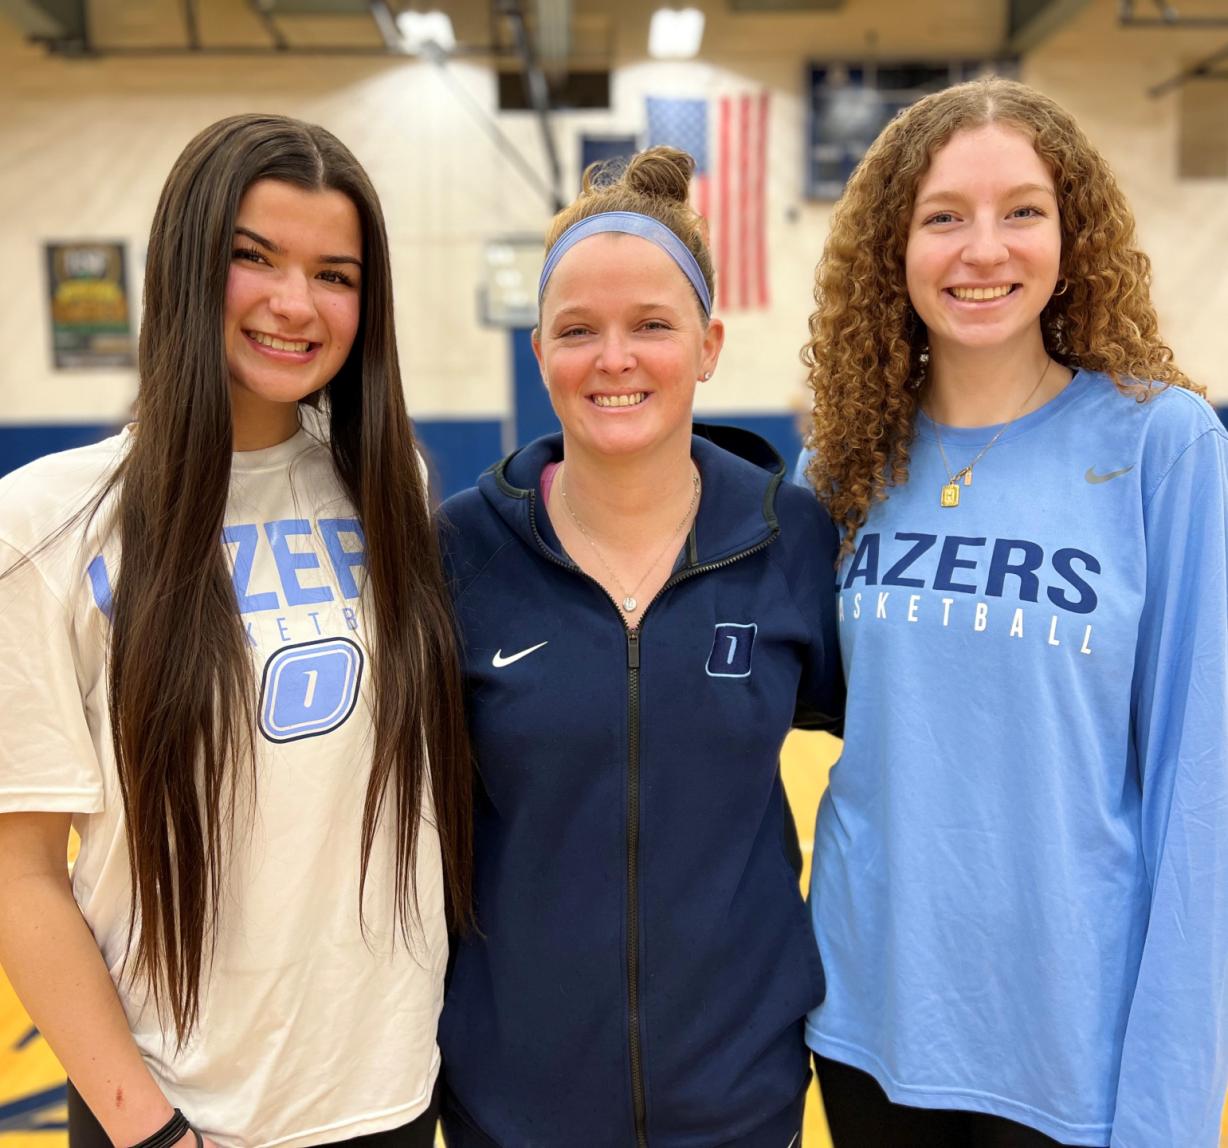 The OCC Women's Basketball team is beginning the second half of the season with the goal of getting back to the national tournament. Pictured are (left to right) Bella Commesso, Head Coach Kelly Seibt, and Hannah Durand.